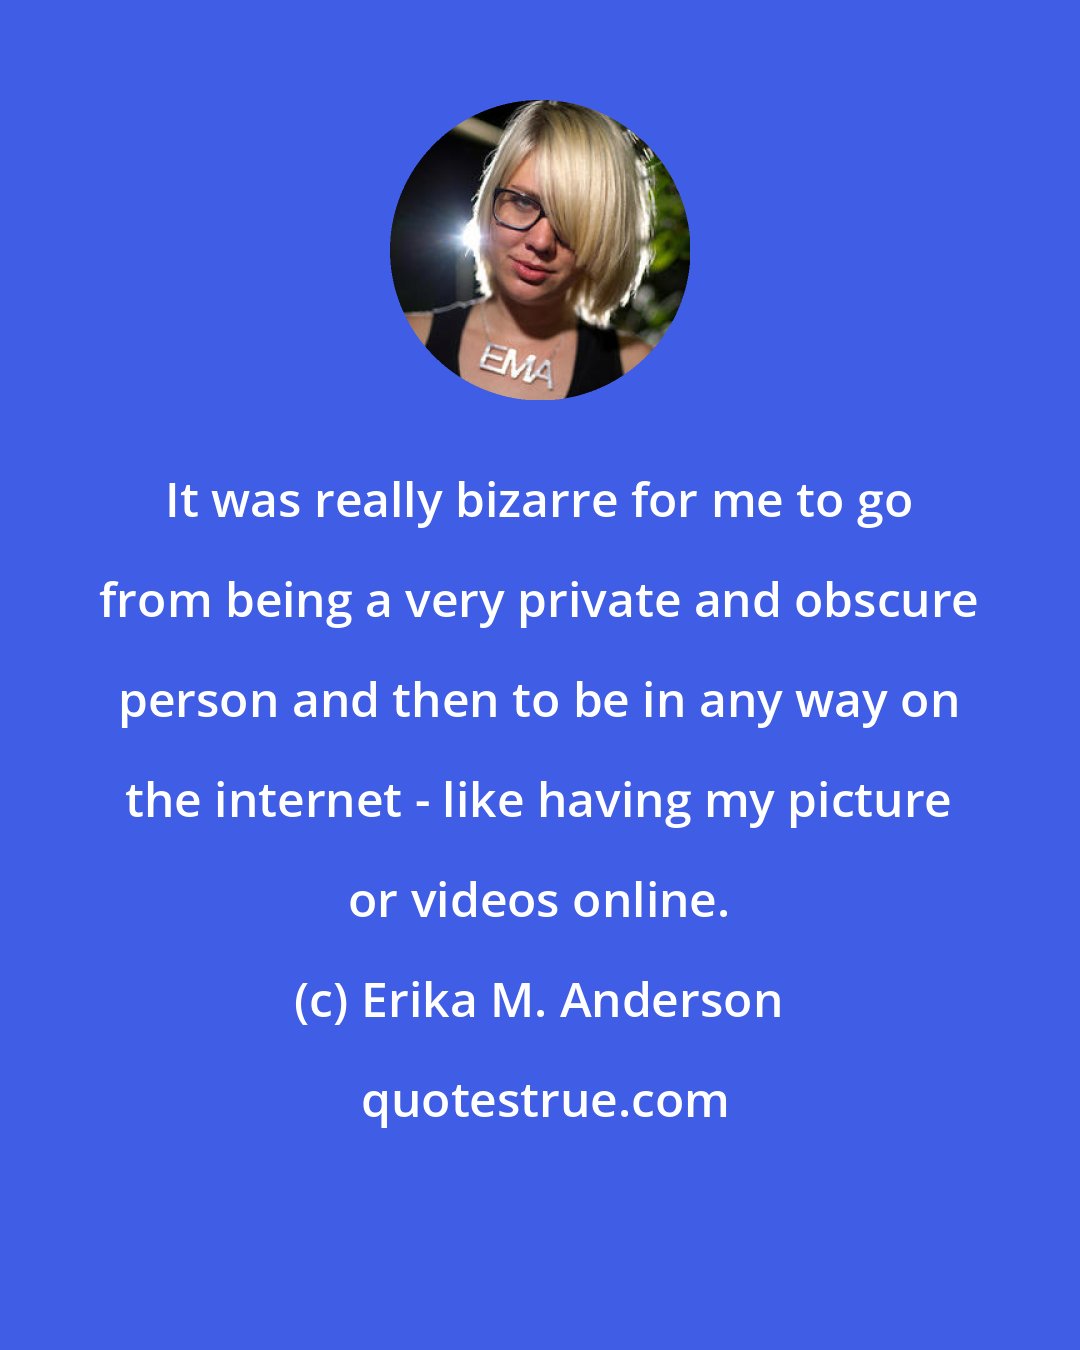 Erika M. Anderson: It was really bizarre for me to go from being a very private and obscure person and then to be in any way on the internet - like having my picture or videos online.